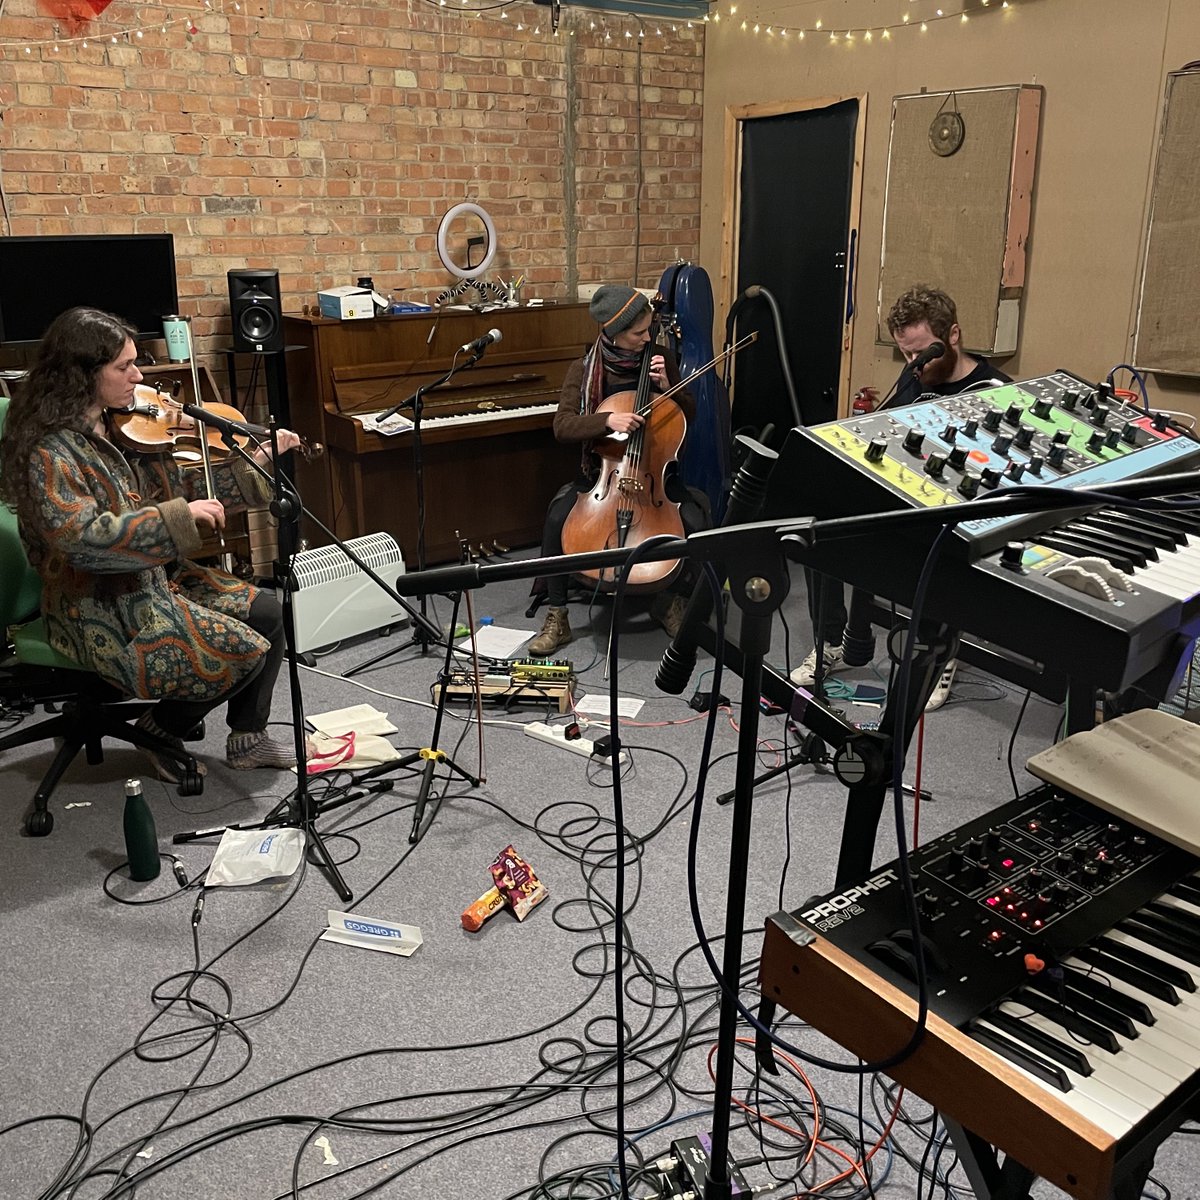 Prepping for our live show on Jan 28th at @TheNorthWall, Oxford. See you there? thenorthwall.com/whats-on/folka… #folkatronica #altfolk #folkgig #gig #folkmusic